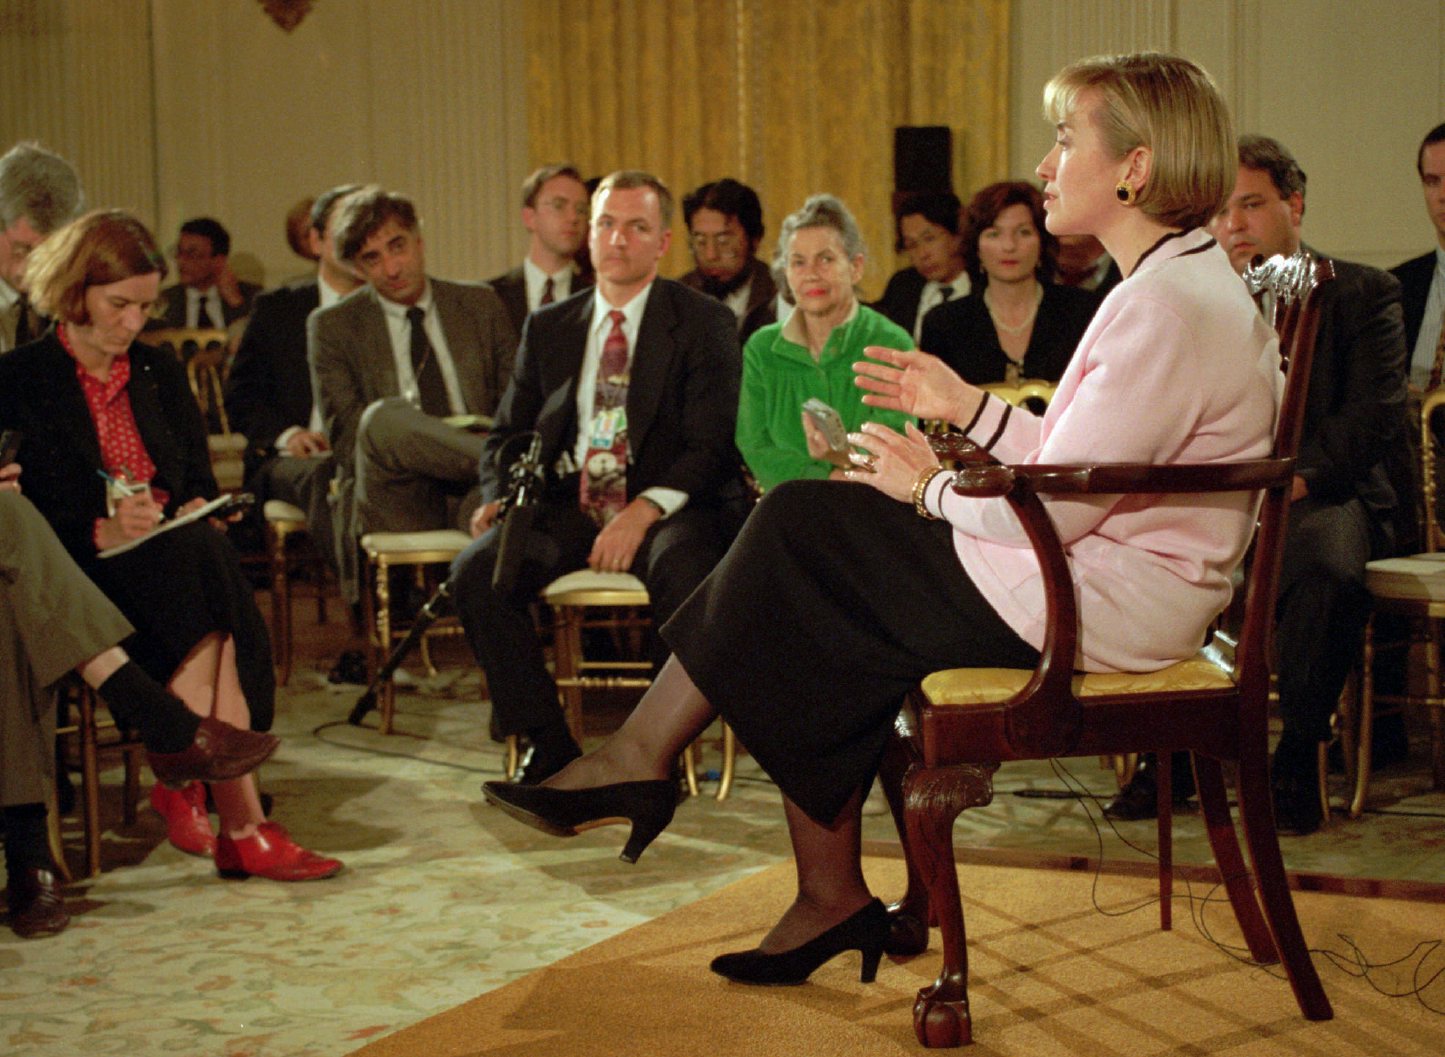 Hillary Clinton's 1994 "pink press conference" addressing the Whitewater scandal and her windfall profits in cattle future trading. (Politifact)